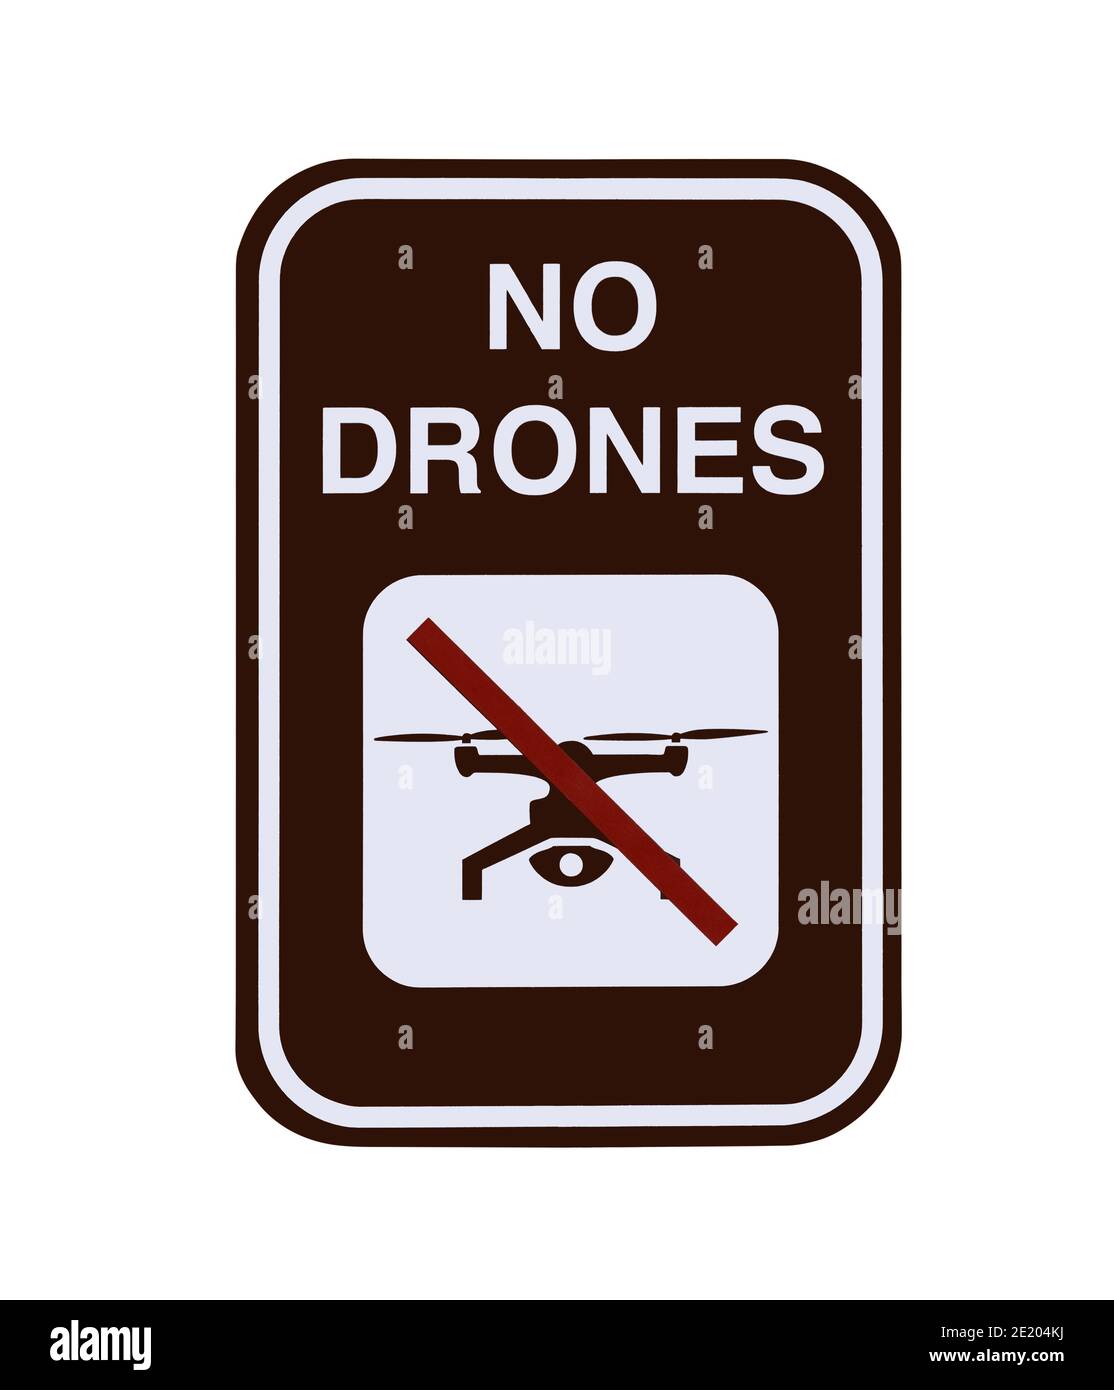 No drones warning sign isolated on white. Stock Photo